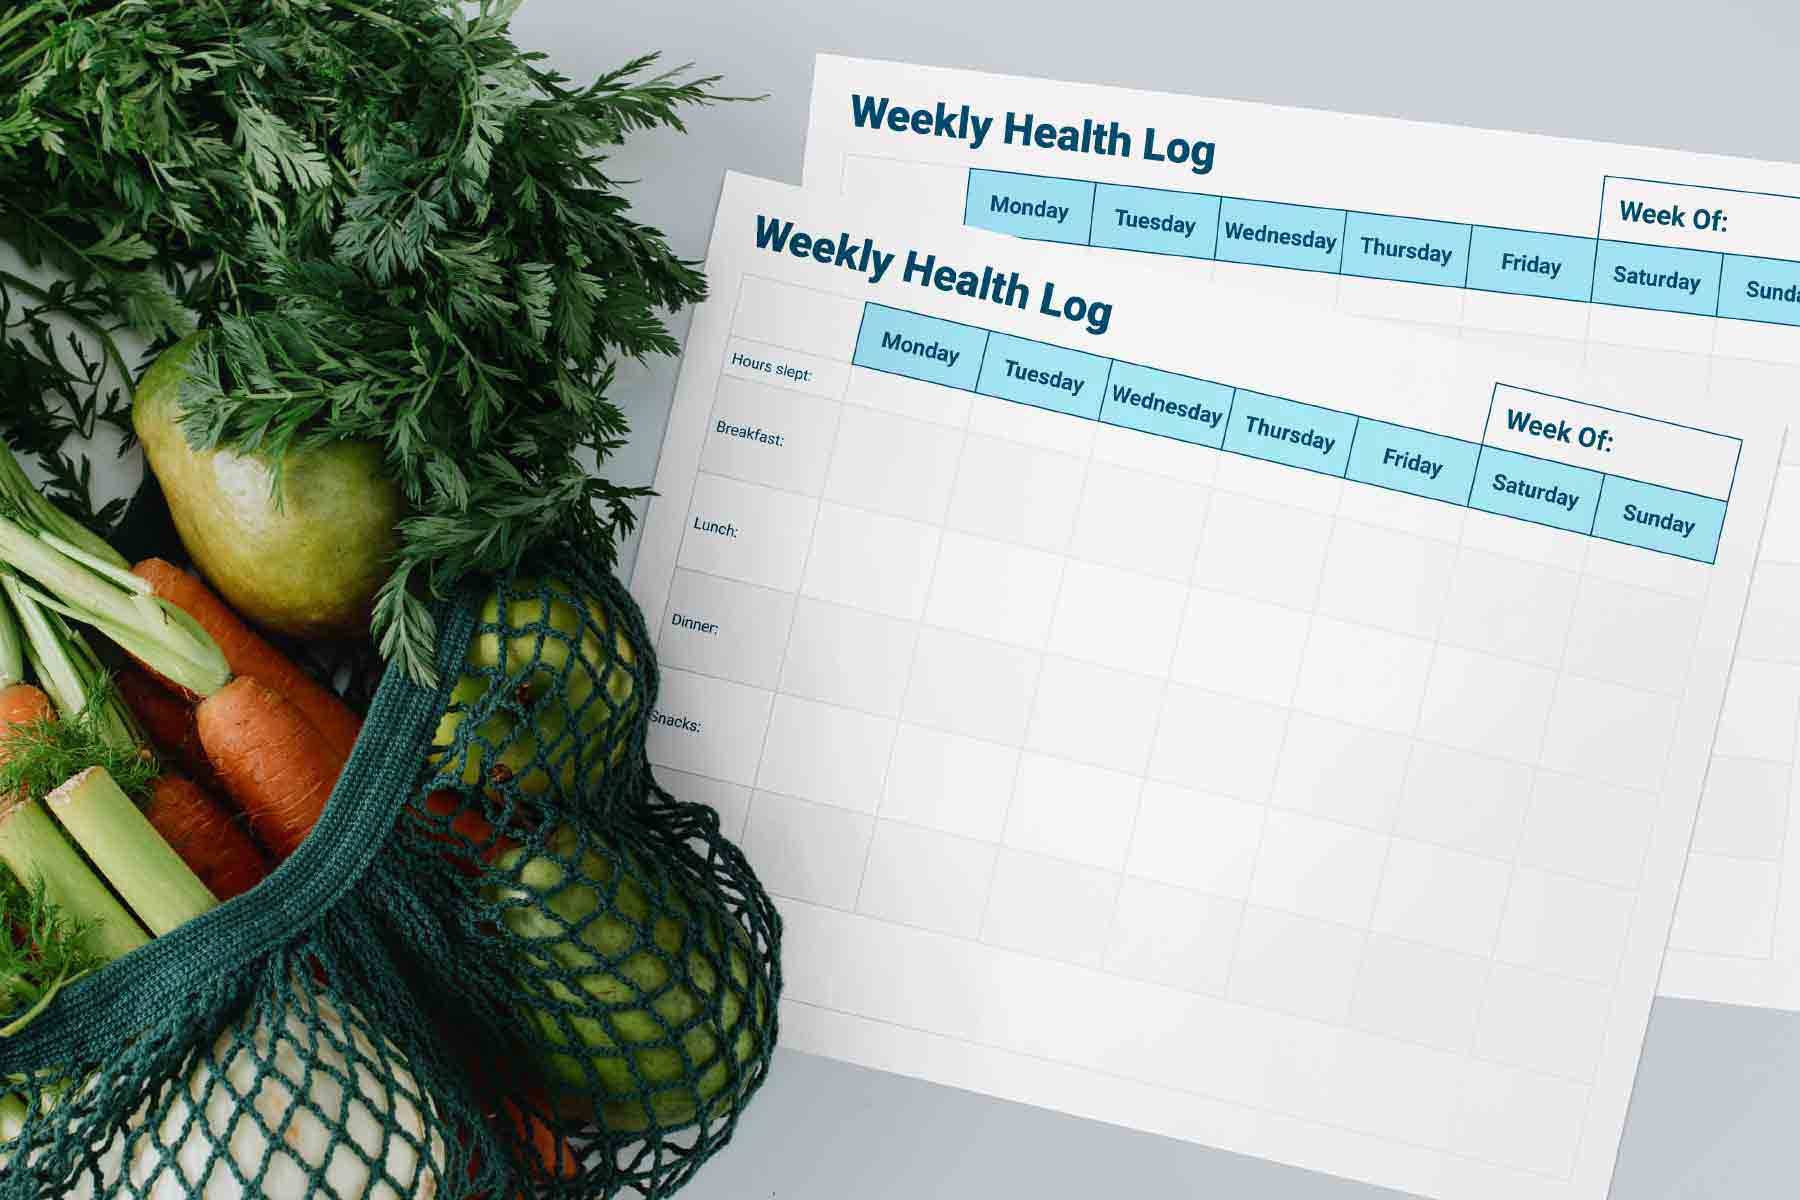 Weekly nutrition log with a bag of vegetables